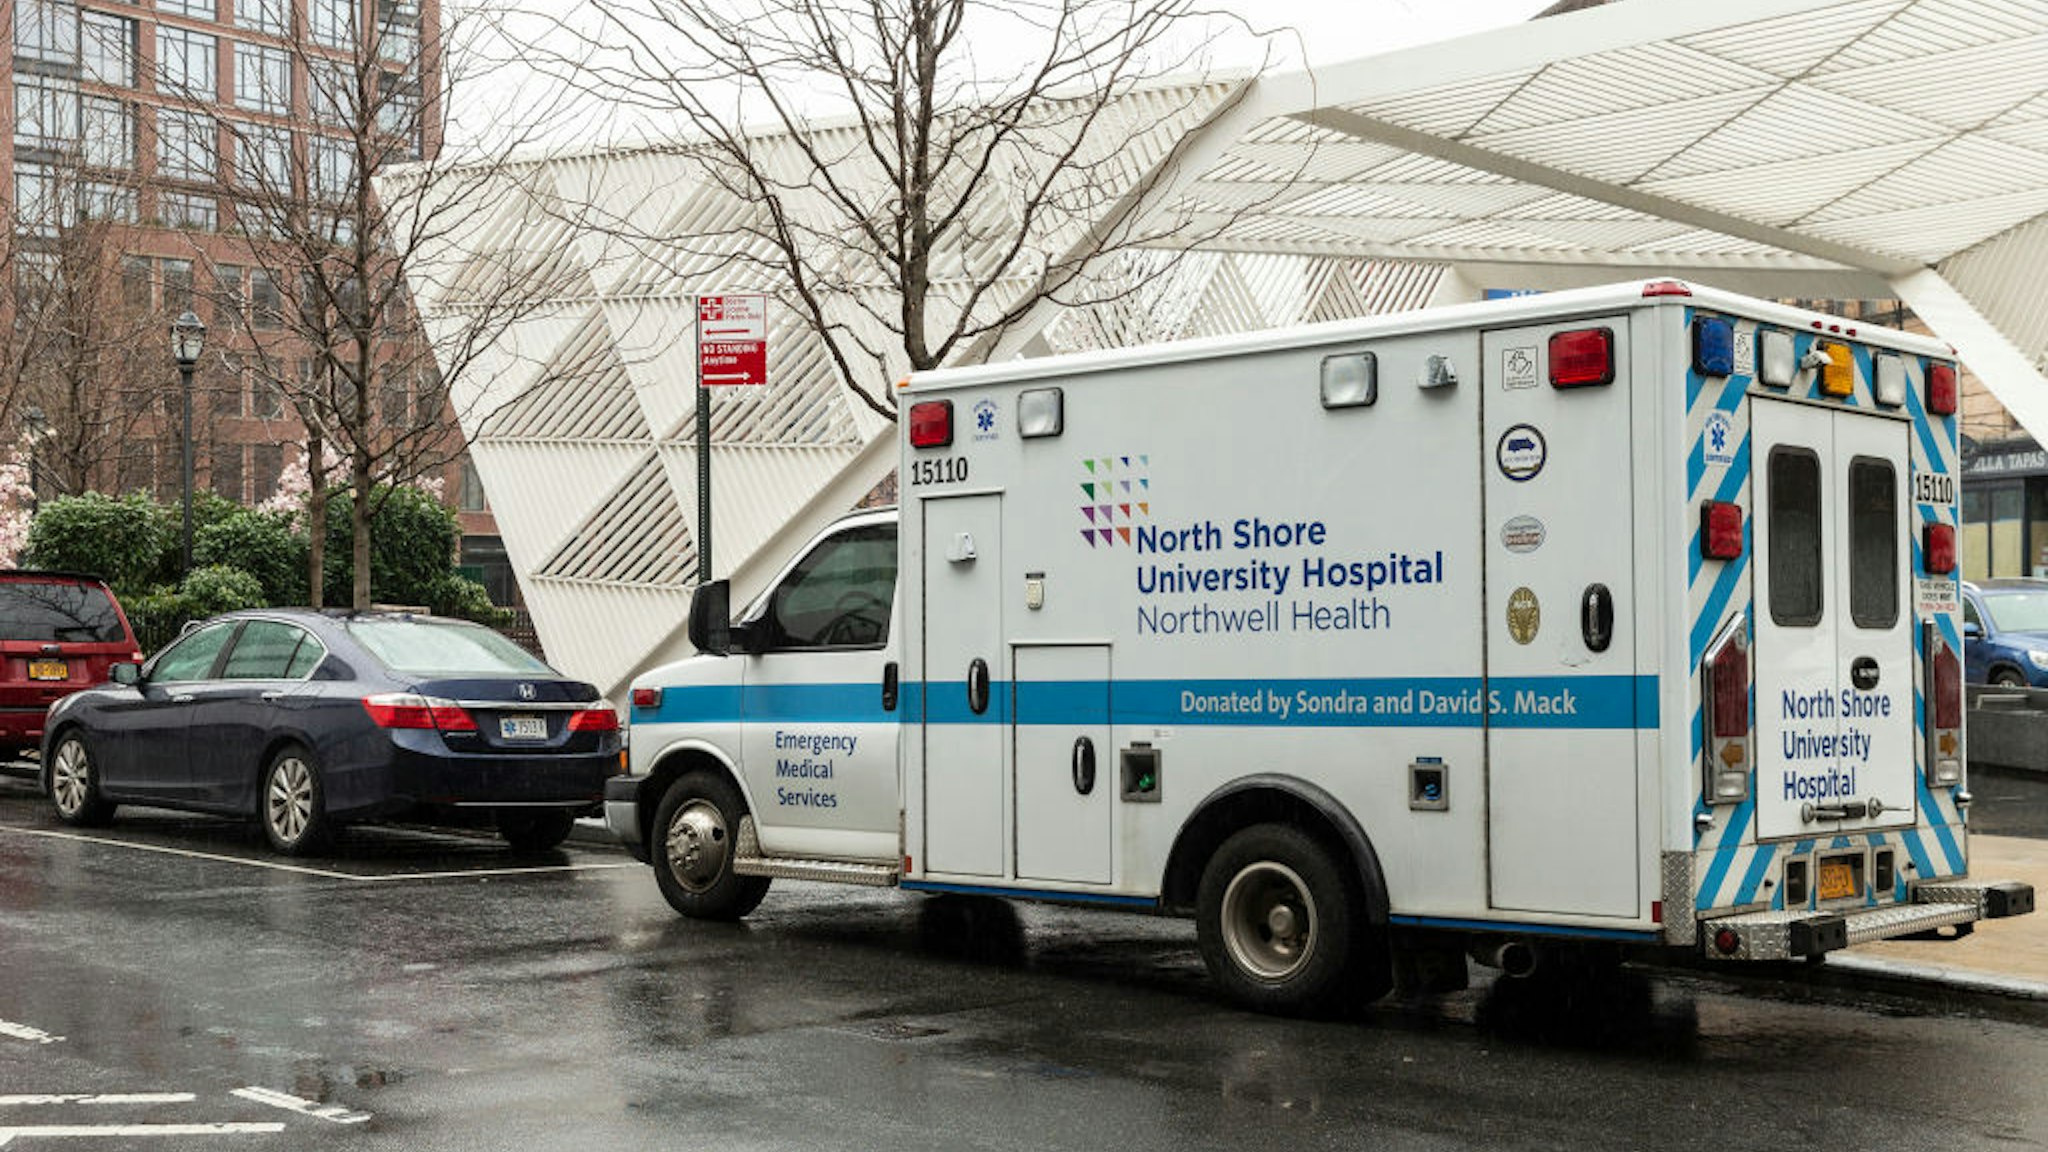 Medical emergency vehicle parked next to Lenox Health Medical Pavilion part of Northwell Health system in Greenwich Village of Manhattan.